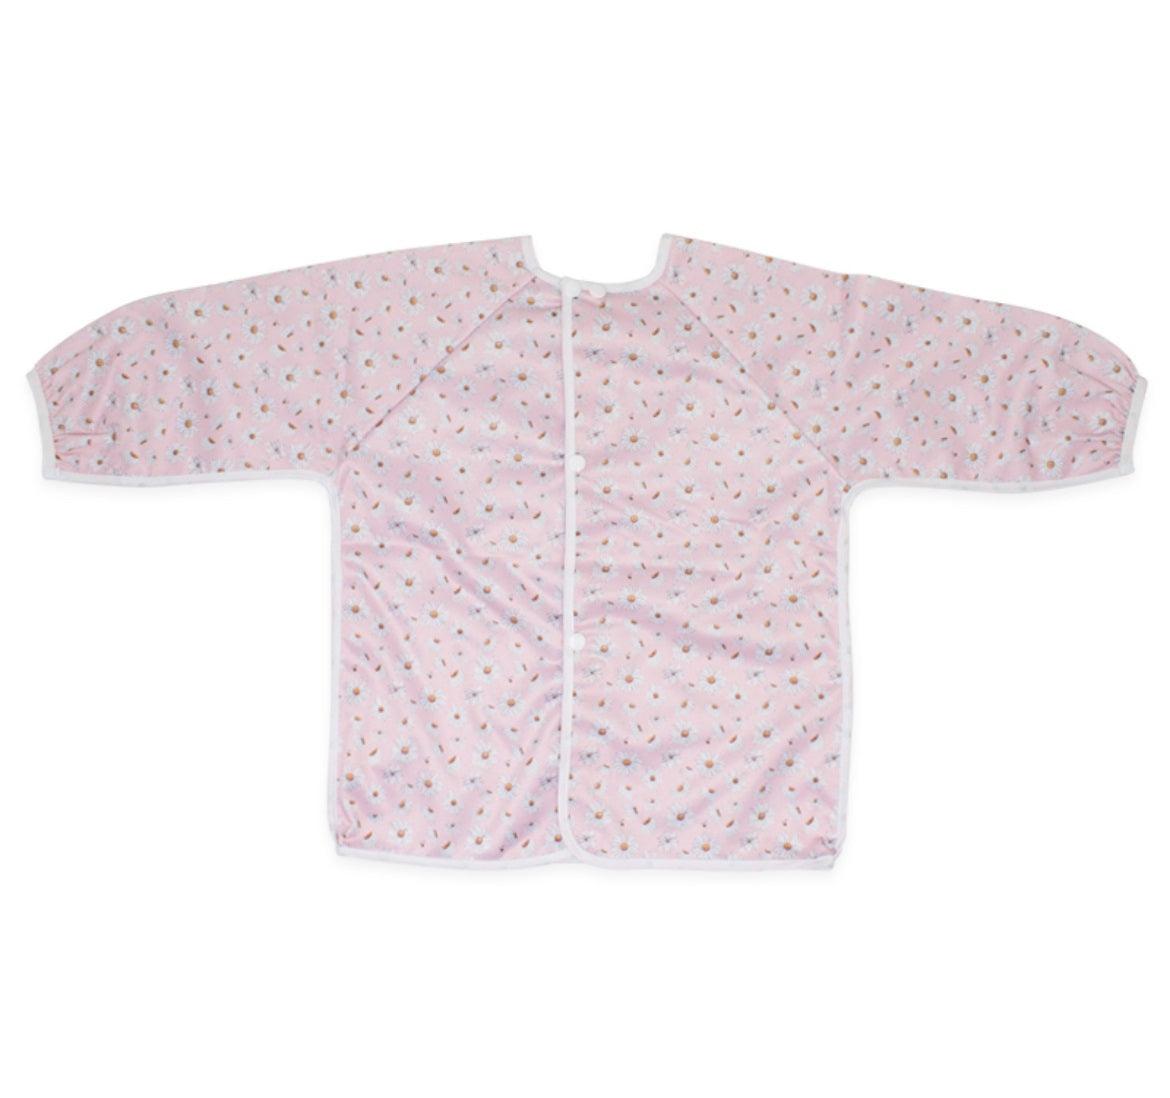 Yoho Baby & co. Toddler sleeved bib perfect for mealtimes and messy play. Pink Daisies Designer Print